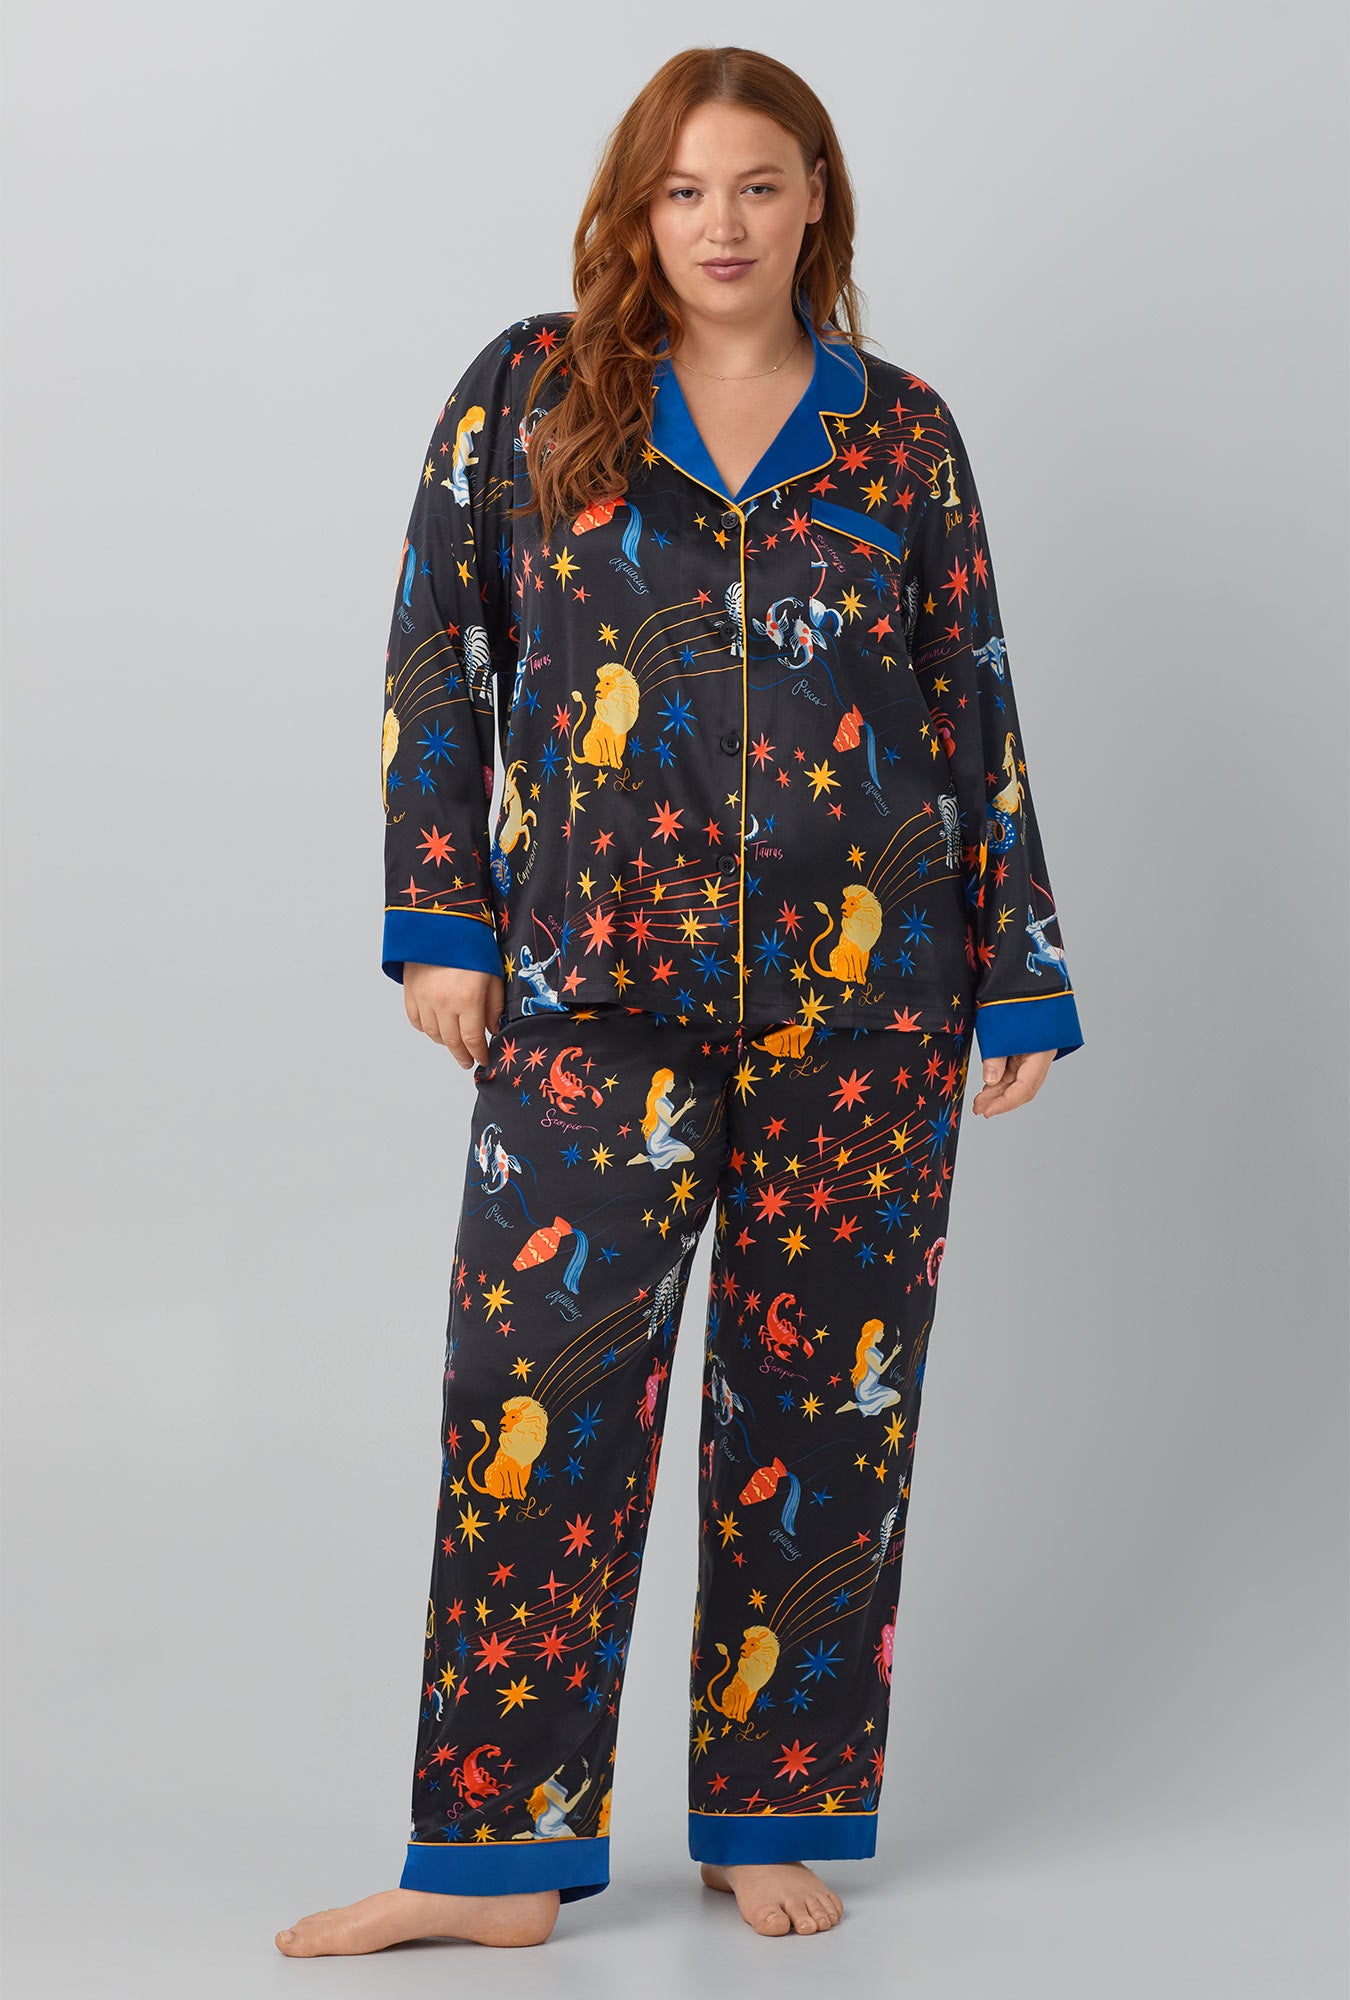 A lady wearing black Long Sleeve Classic Washable Silk PJ Set with Celestial Dreams print